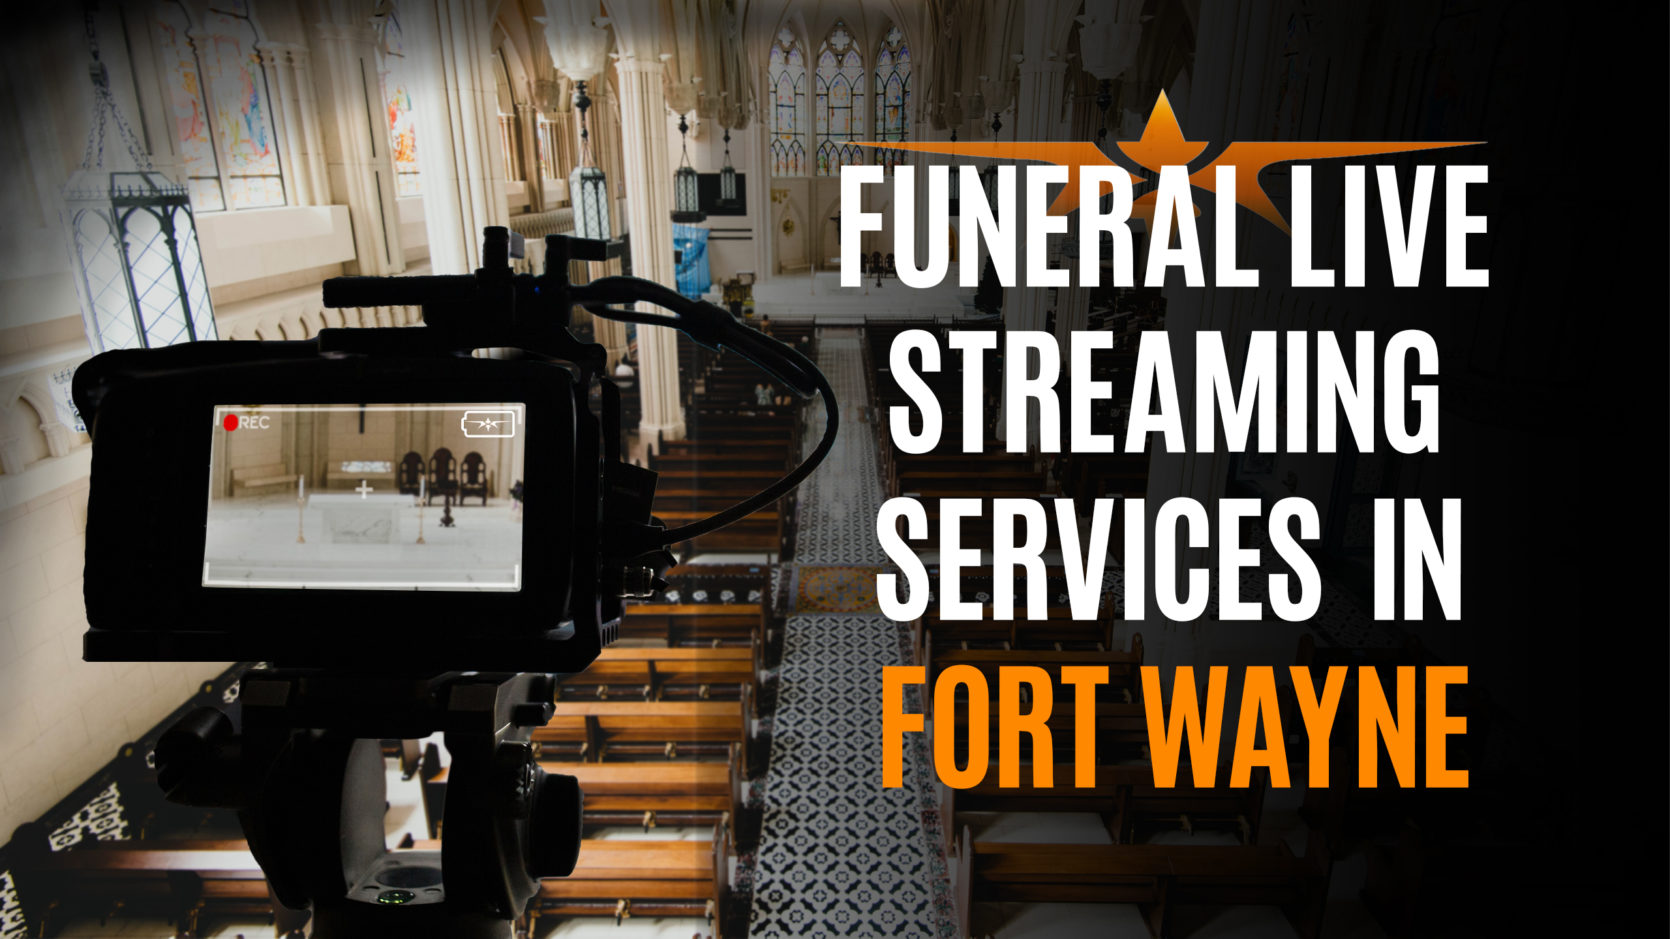 Funeral Live Streaming Services in Fort Wayne